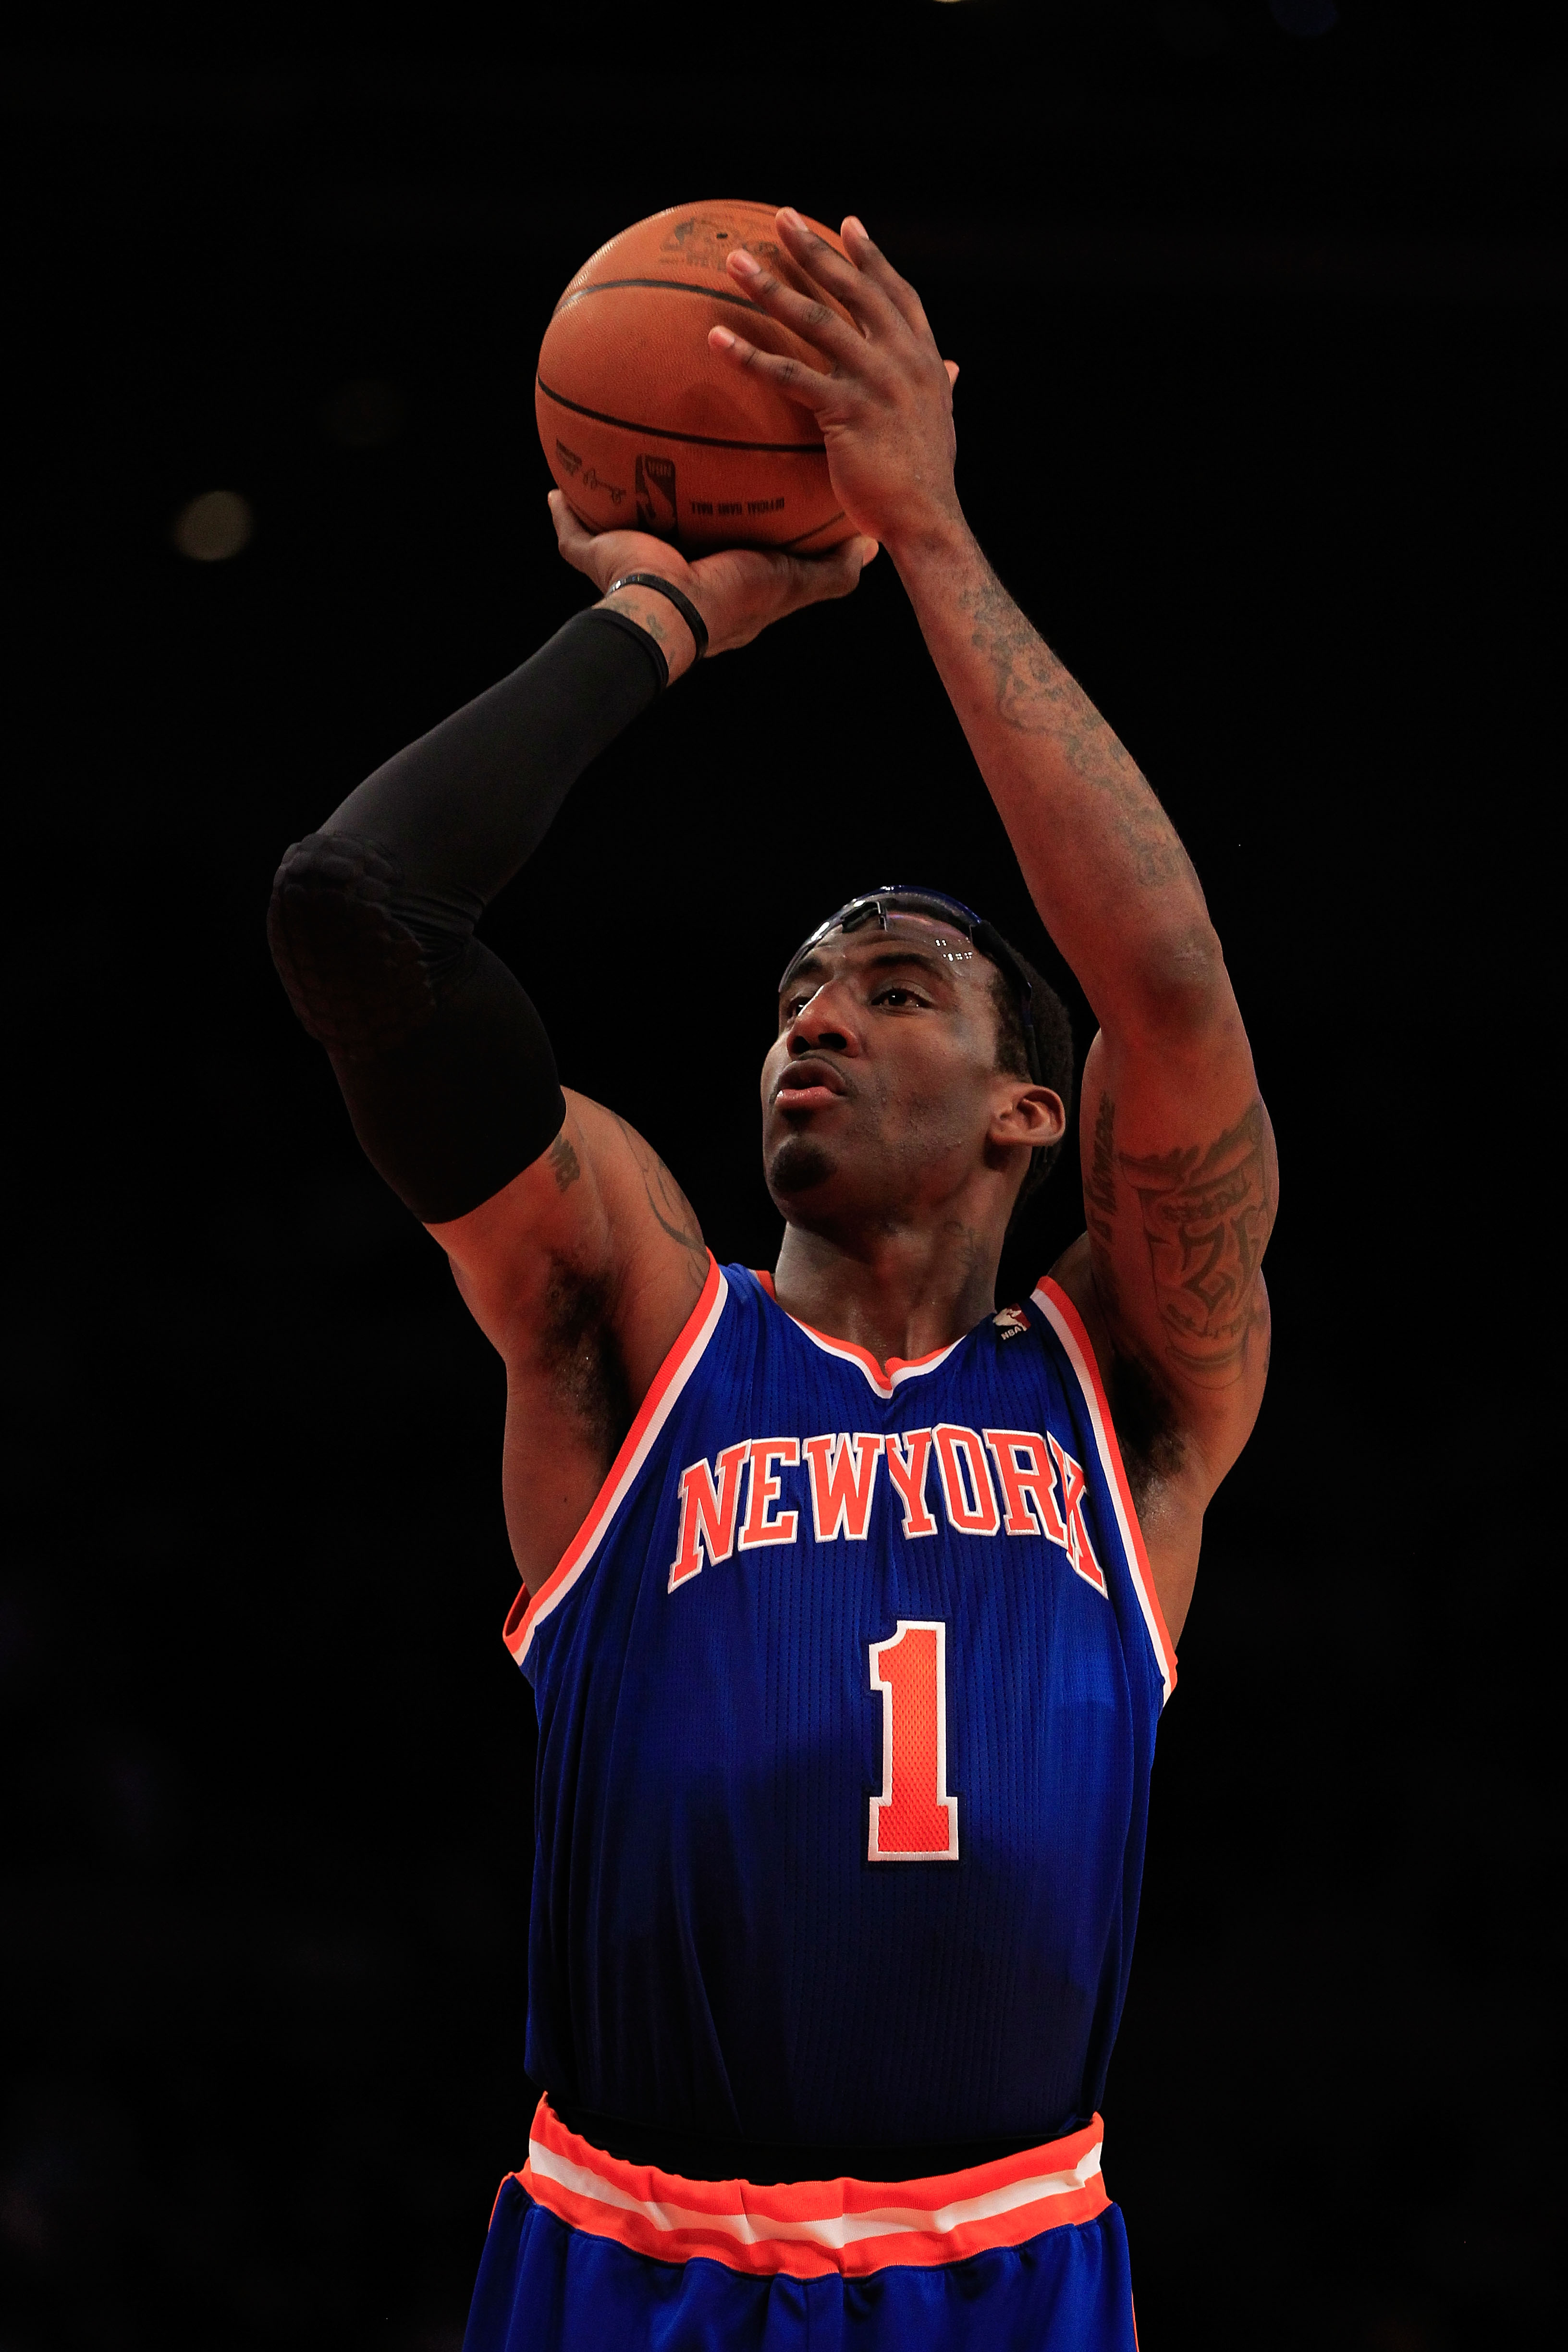 NEW YORK, NY - FEBRUARY 16:  Amar'e Stoudemire #1 of the New York Knicks shoots a free throw against the Atlanta Hawks at Madison Square Garden on February 16, 2011 in New York City. NOTE TO USER: User expressly acknowledges and agrees that, by downloadin